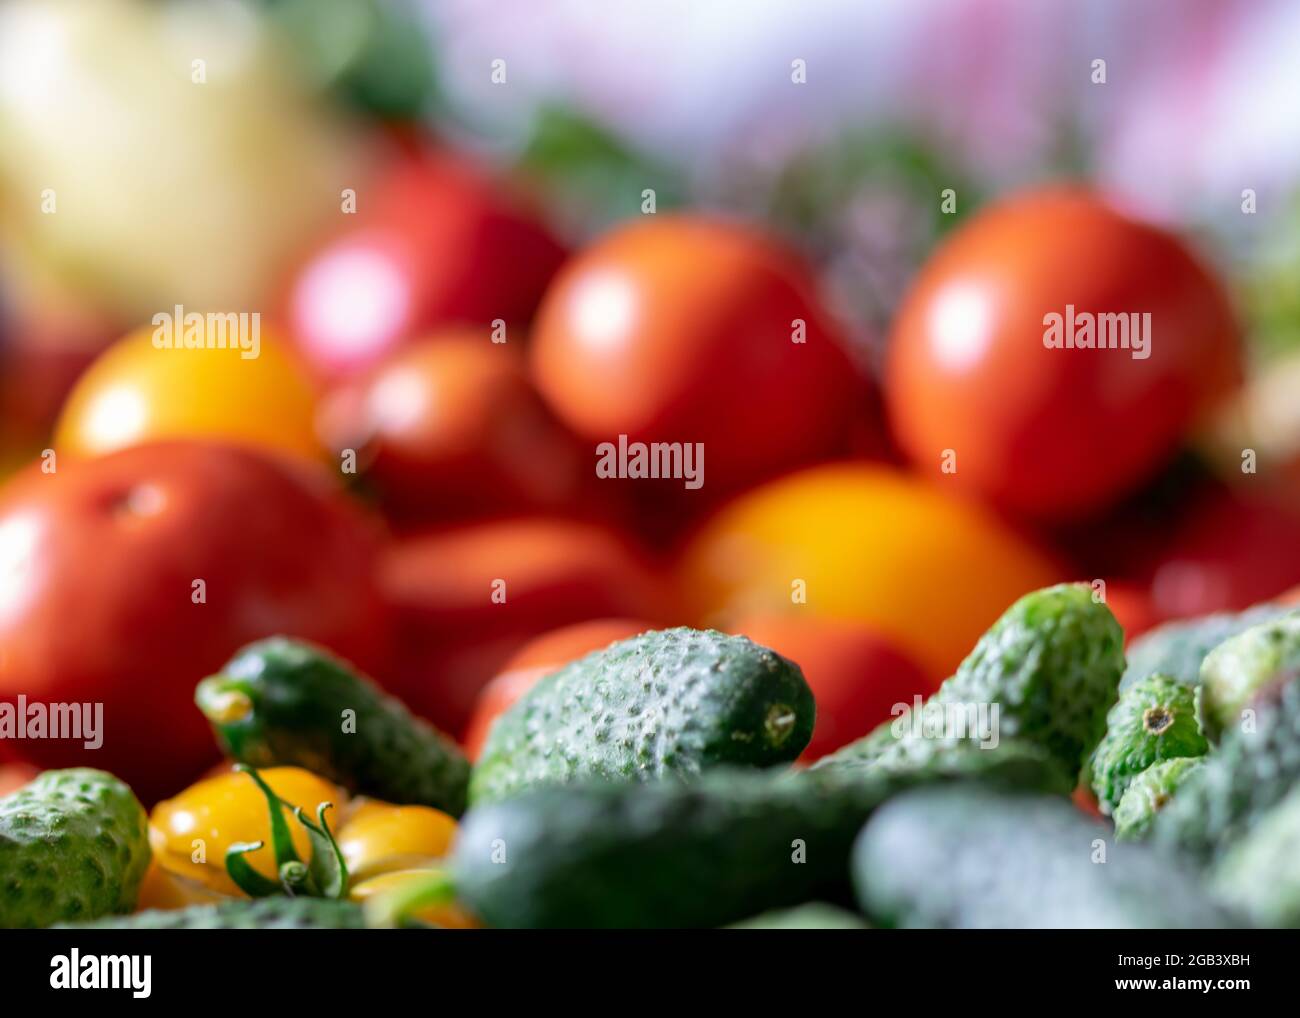 color photo with autumn vegetables on the table, different colors, shapes and types of vegetables prepared for home canning, vegetable fragments, autu Stock Photo